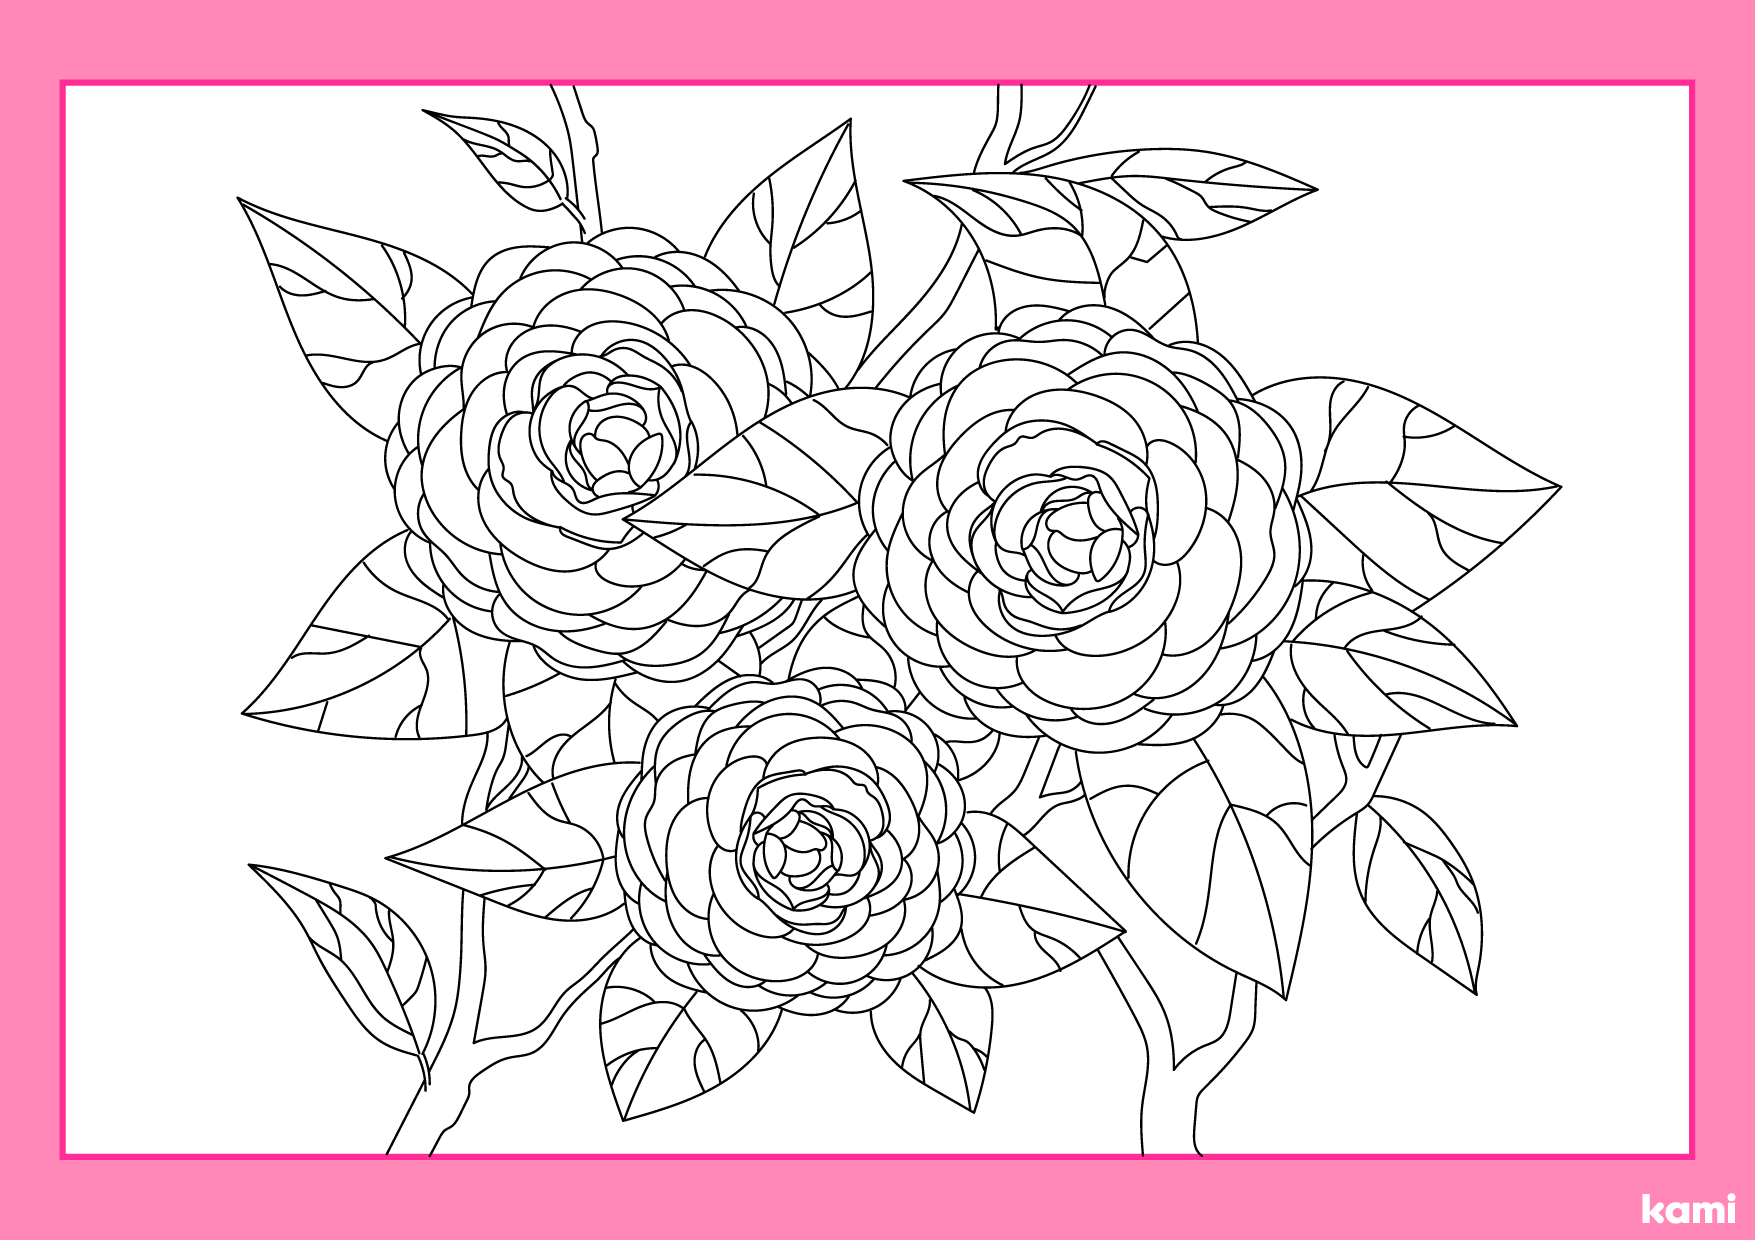 Spring flowers coloring sheet pink border for teachers perfect for grades st nd rd th k pre k other classroom resources kami library